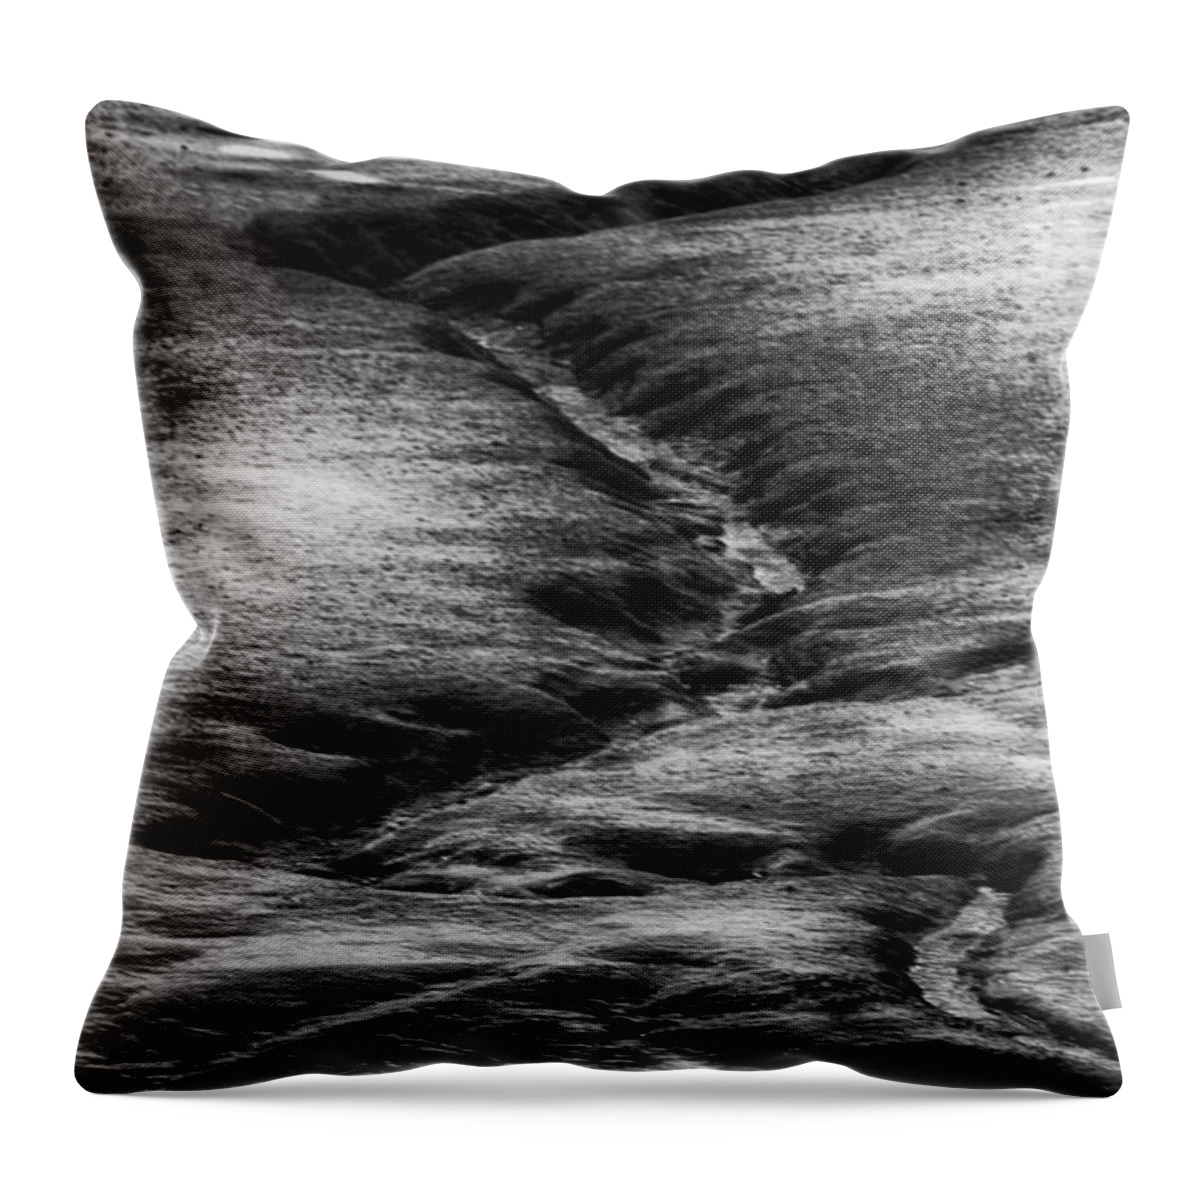 Pool Throw Pillow featuring the photograph Streaming To The Pool by Robert Woodward